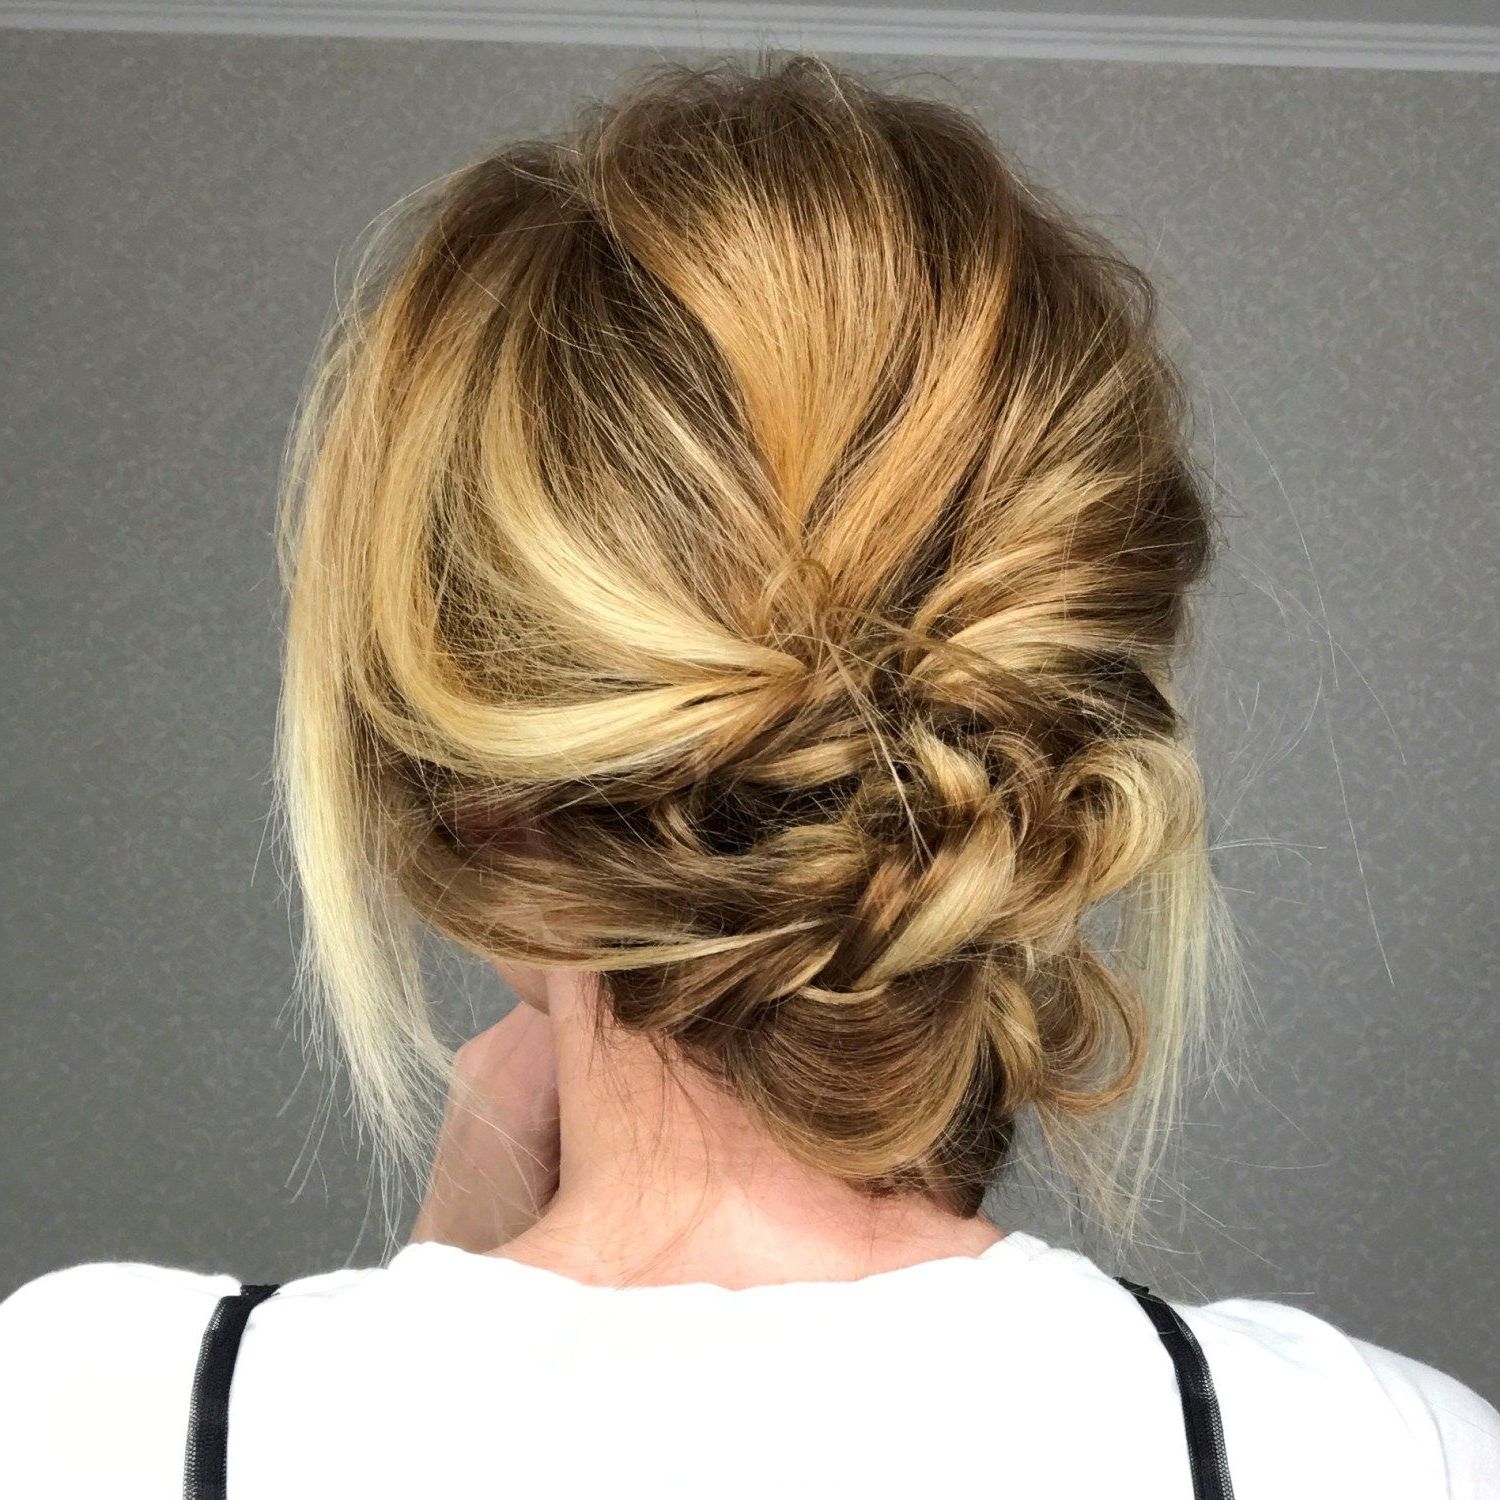 Master These 4 Stylish Bun Hairstyles With Our Step By Step Pertaining To Current Braided Chignon Prom Hairstyles (View 18 of 20)